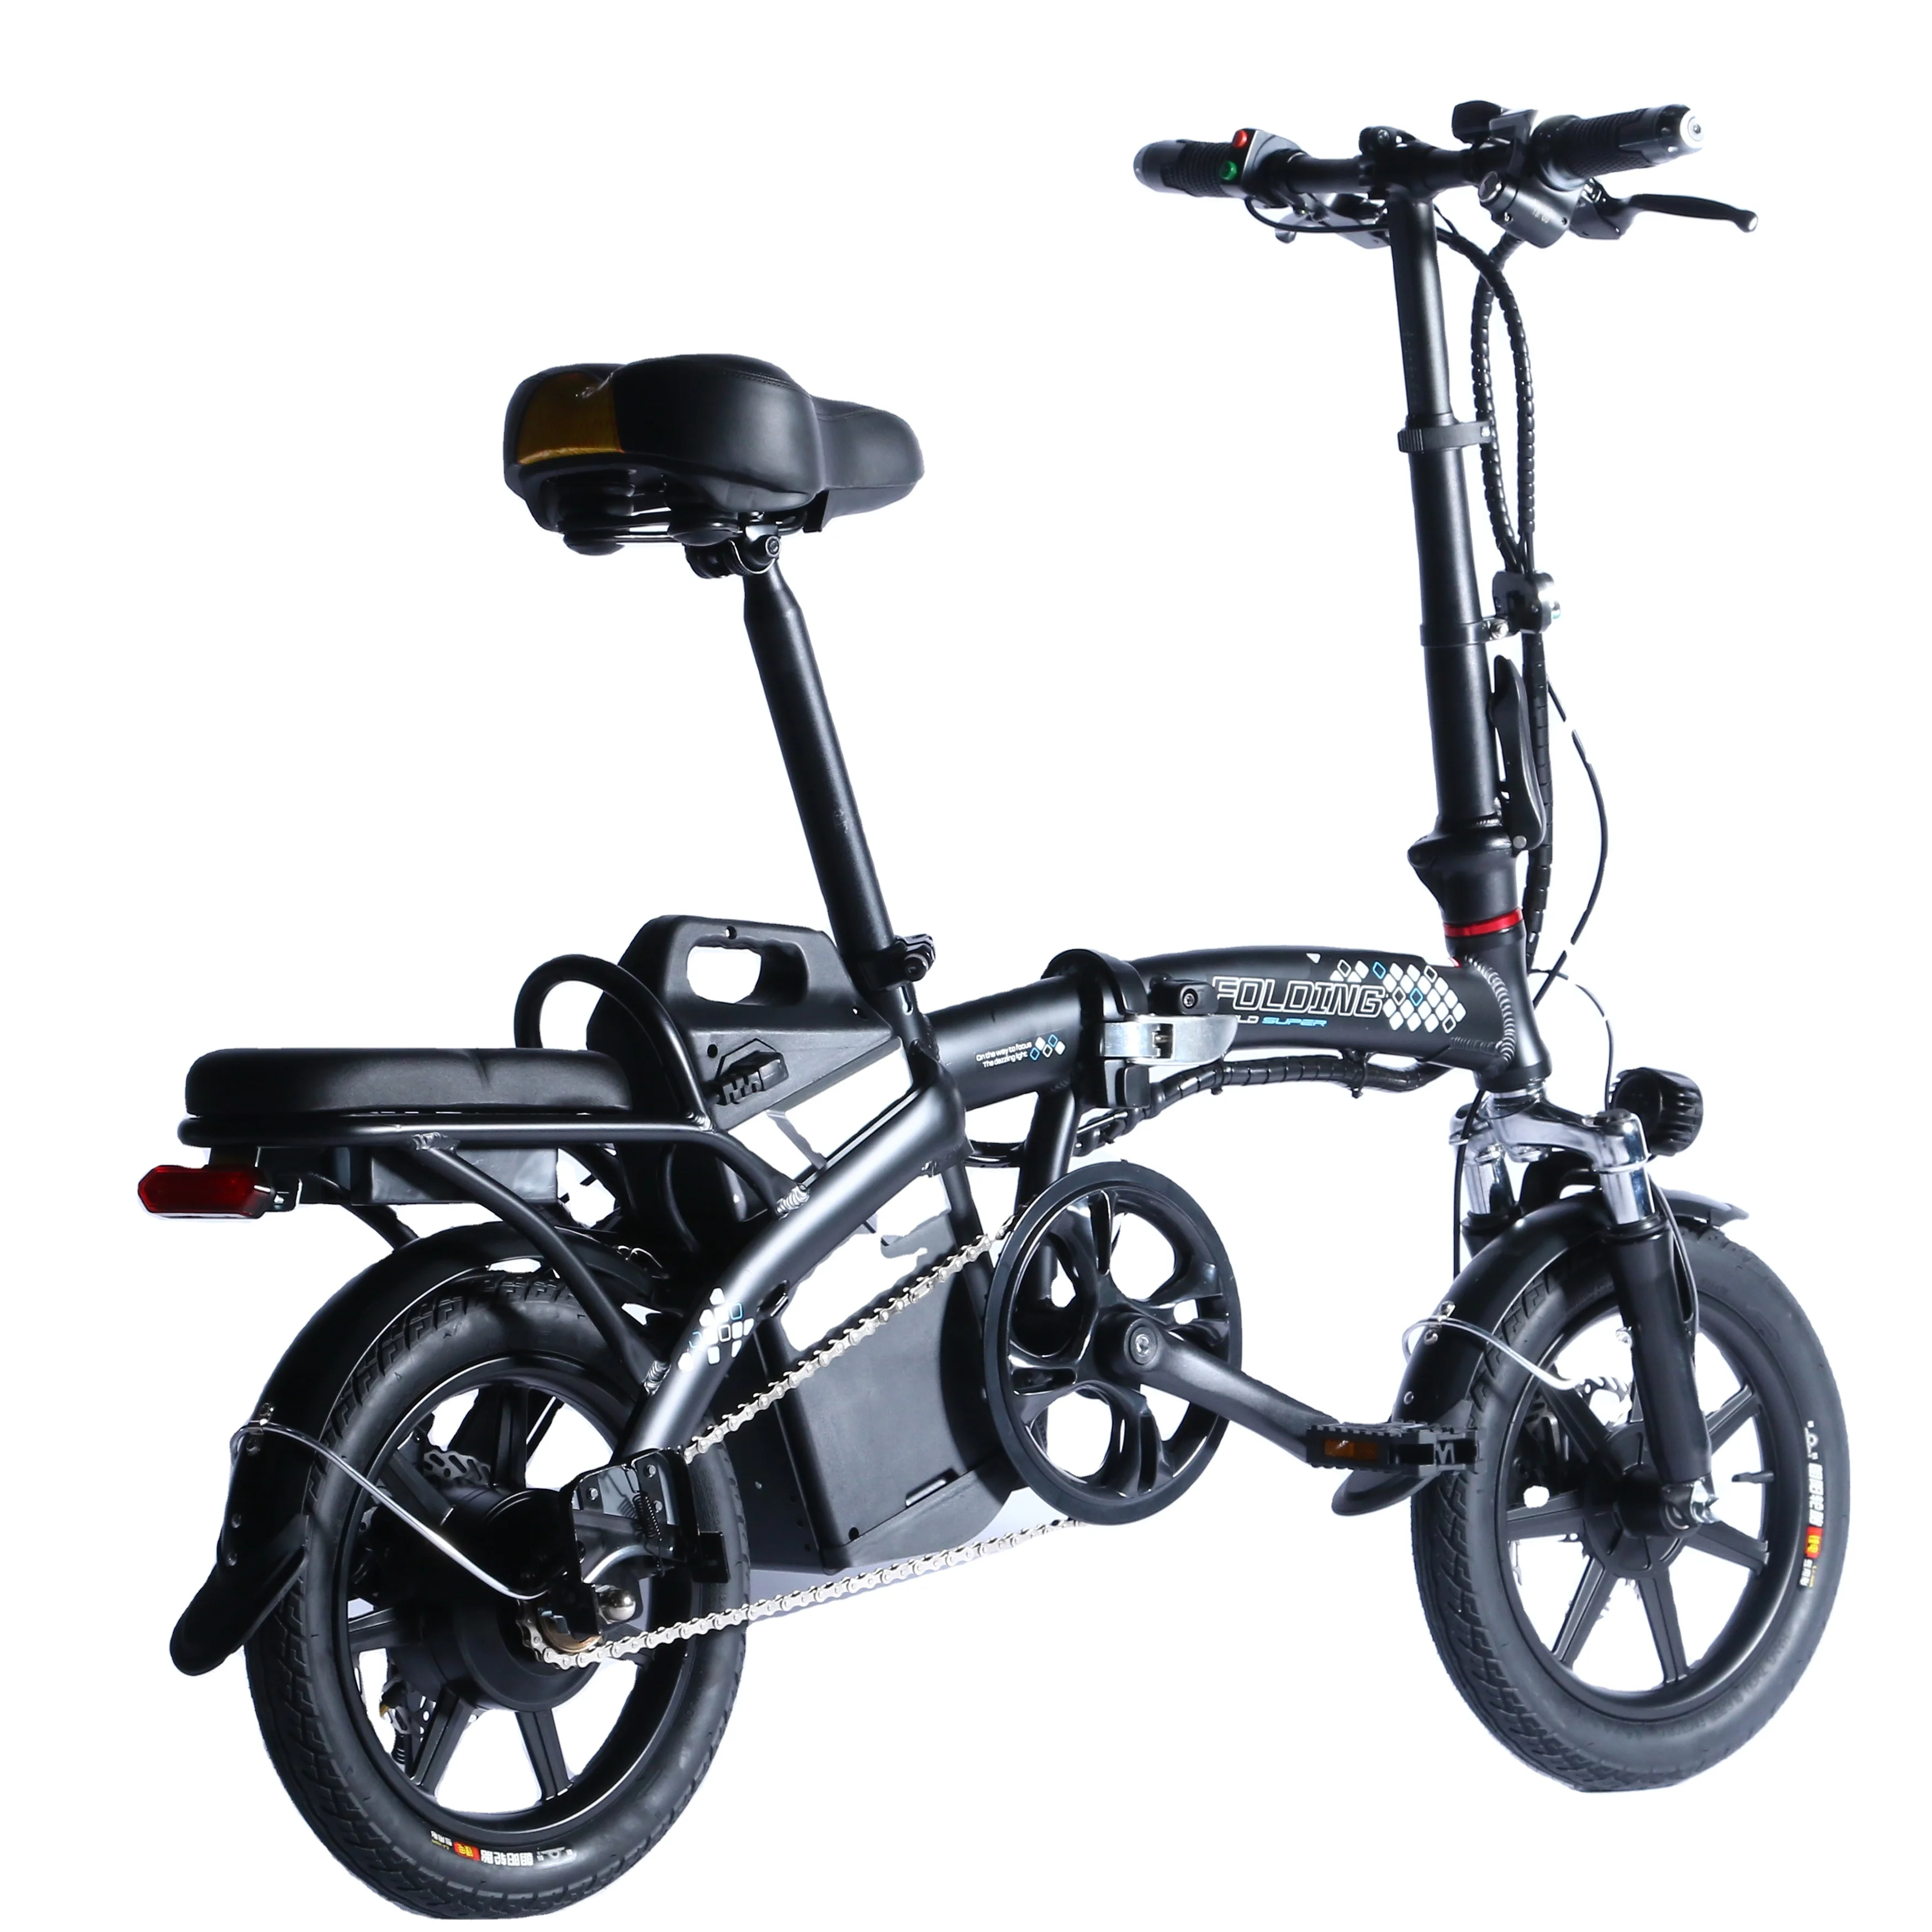 35Ww road electric bicycle 48v battery e-bike for sale/buy ebike from China, Red, black, white , gray, orange